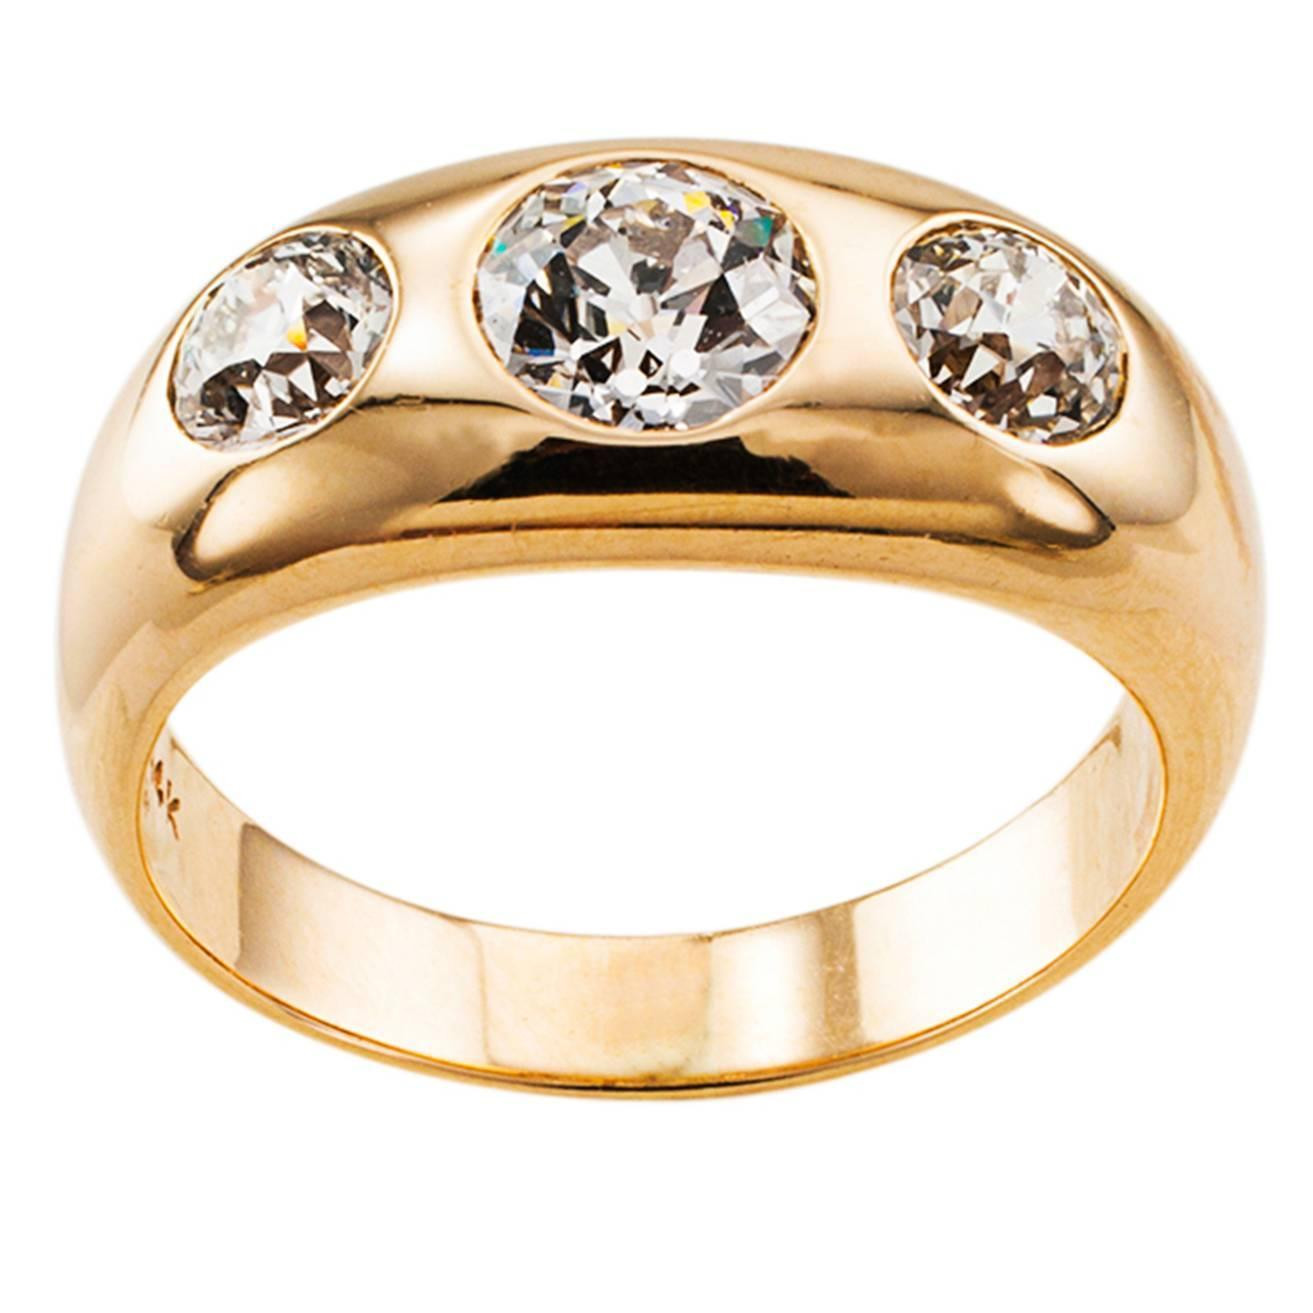 Diamond Rings For Sale
 Three Stone Diamond Gold Gypsy Ring For Sale at 1stdibs